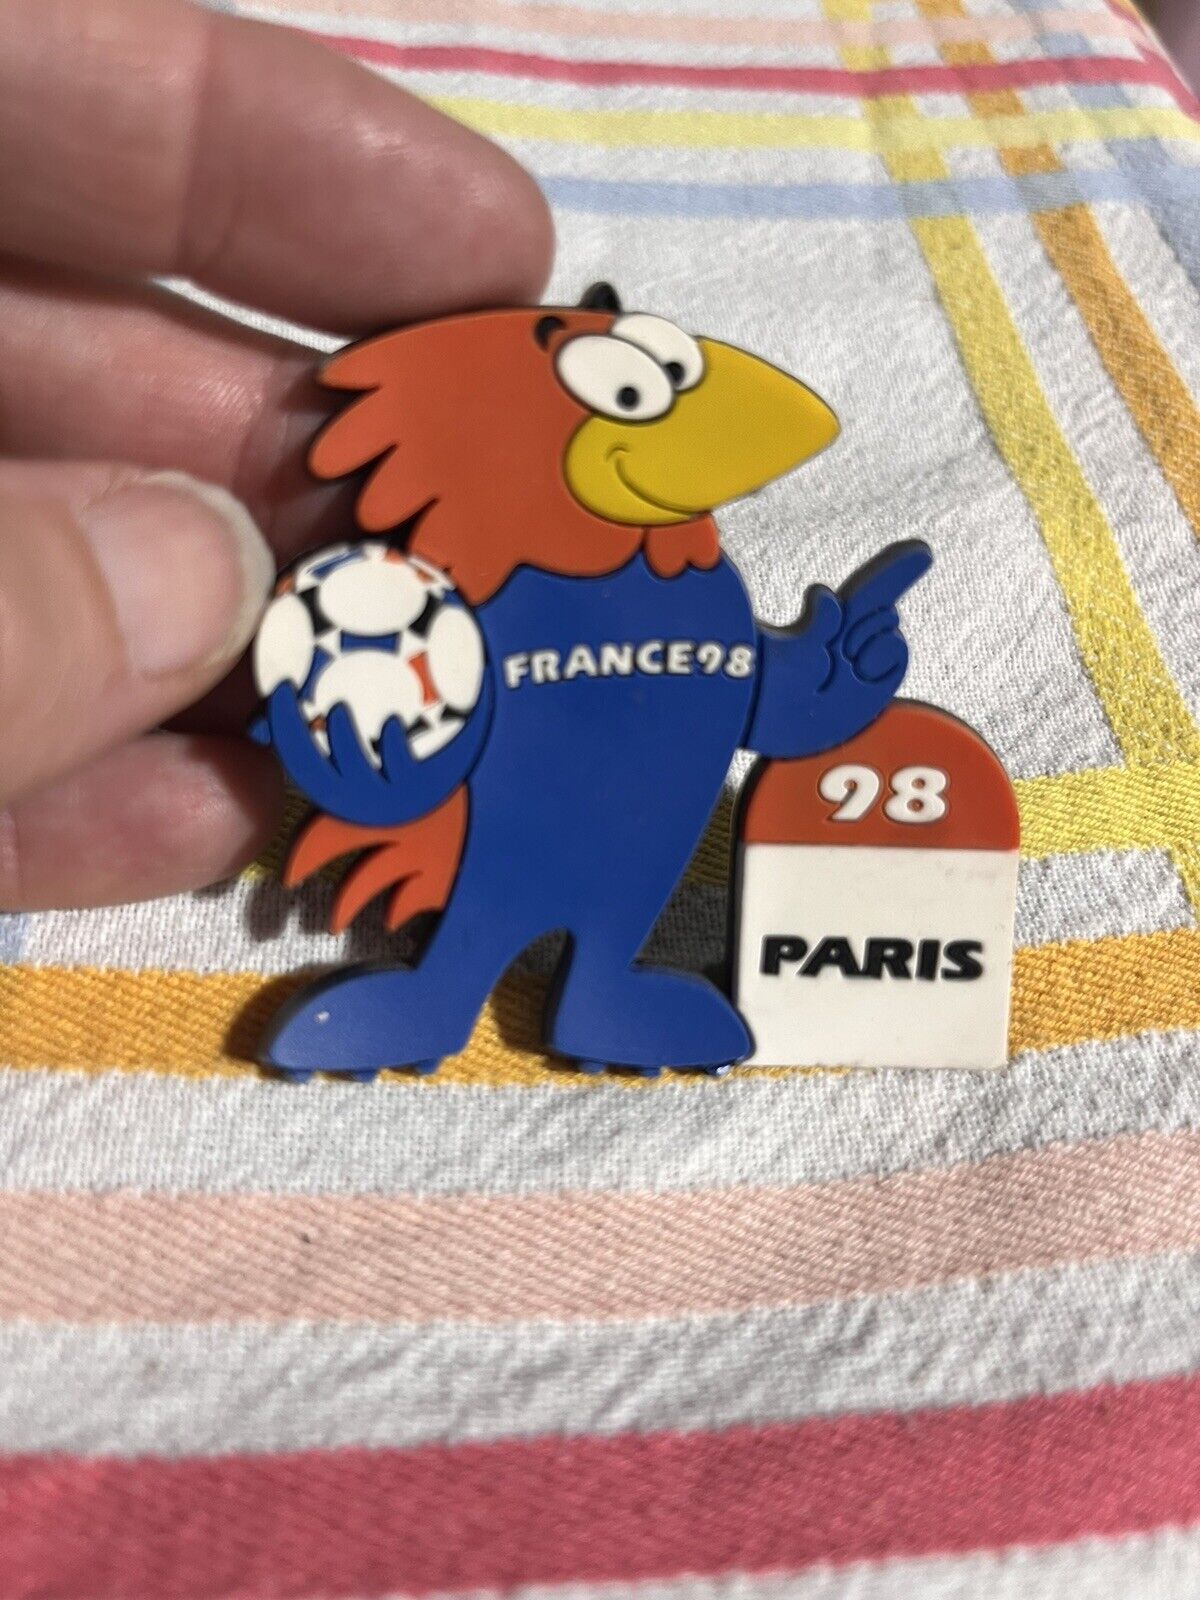 1998 France 98 World Cup Rubber Soccer Futbol Toy Bird  Olympic Mascot Magnet